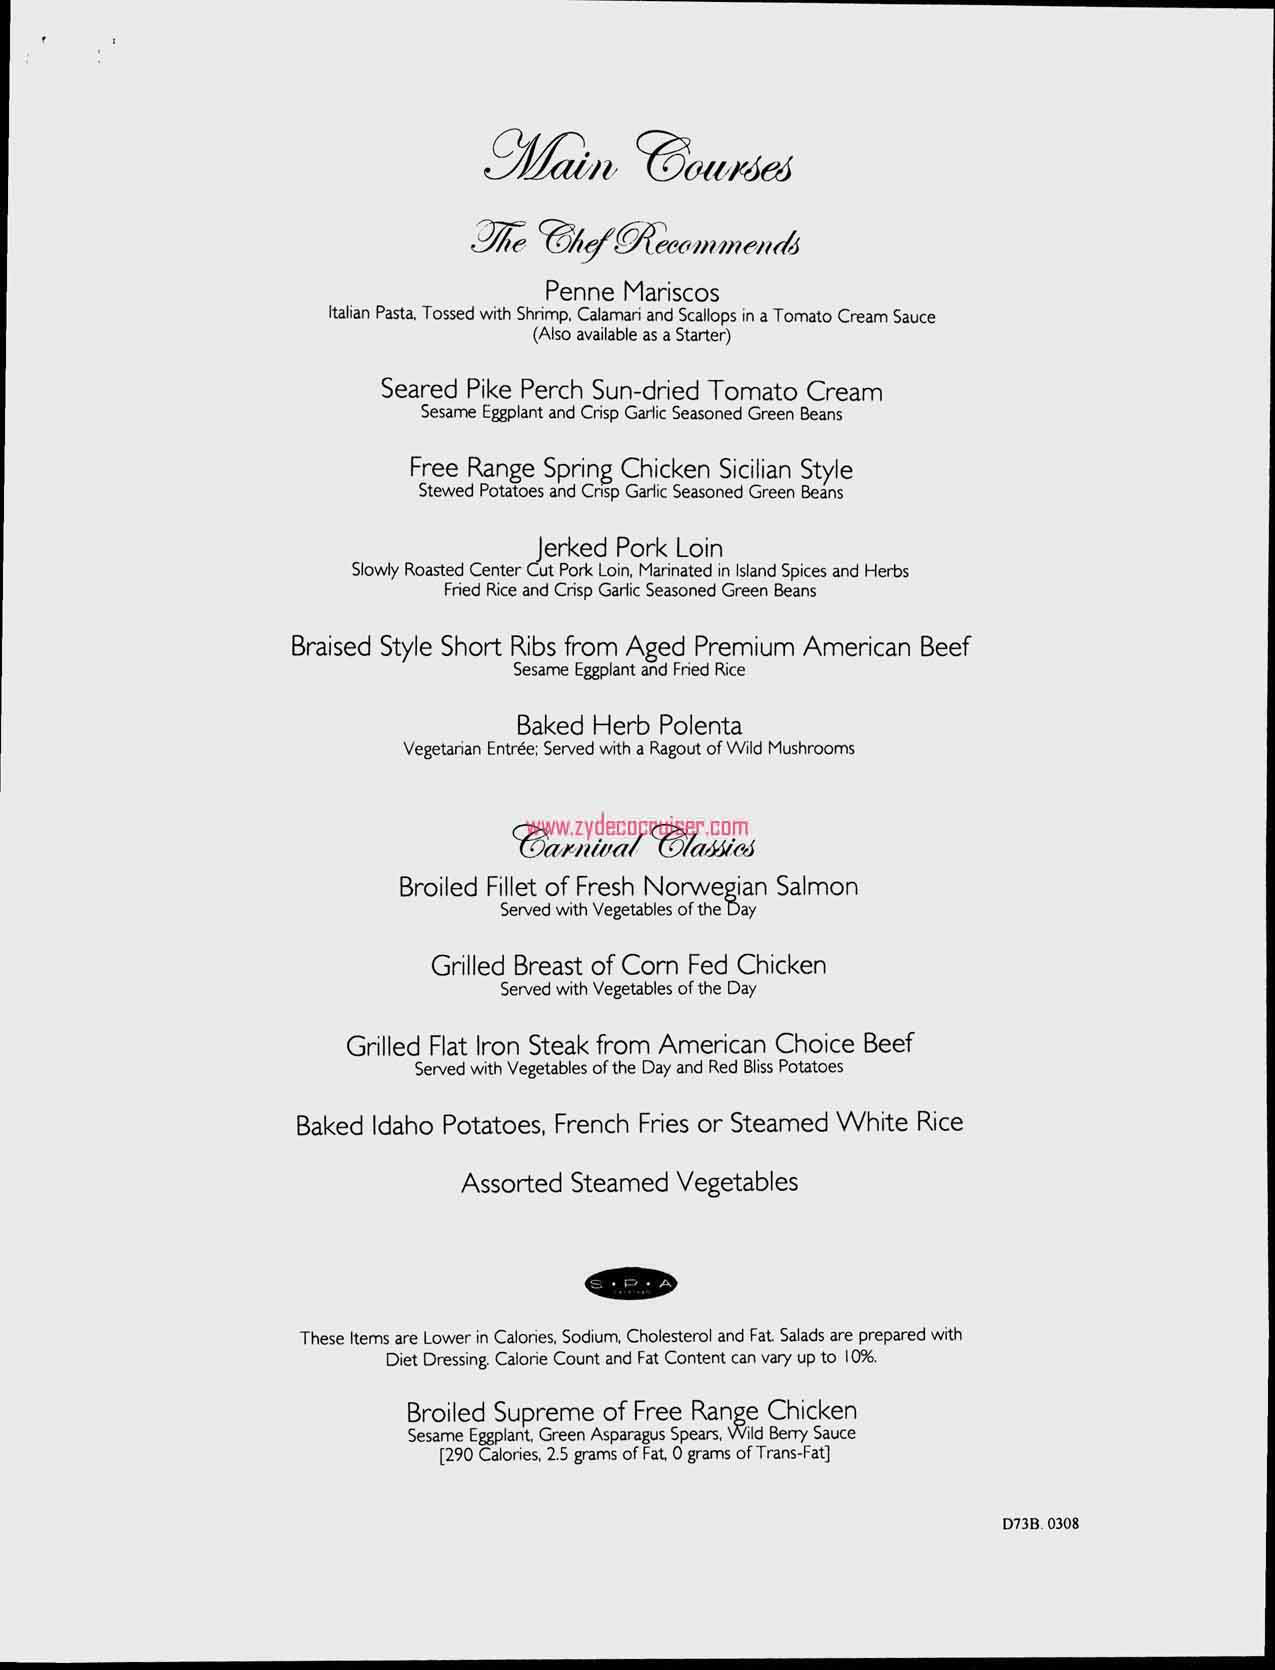 Dinner Menu, Day 2, Page 2, Carnival Freedom